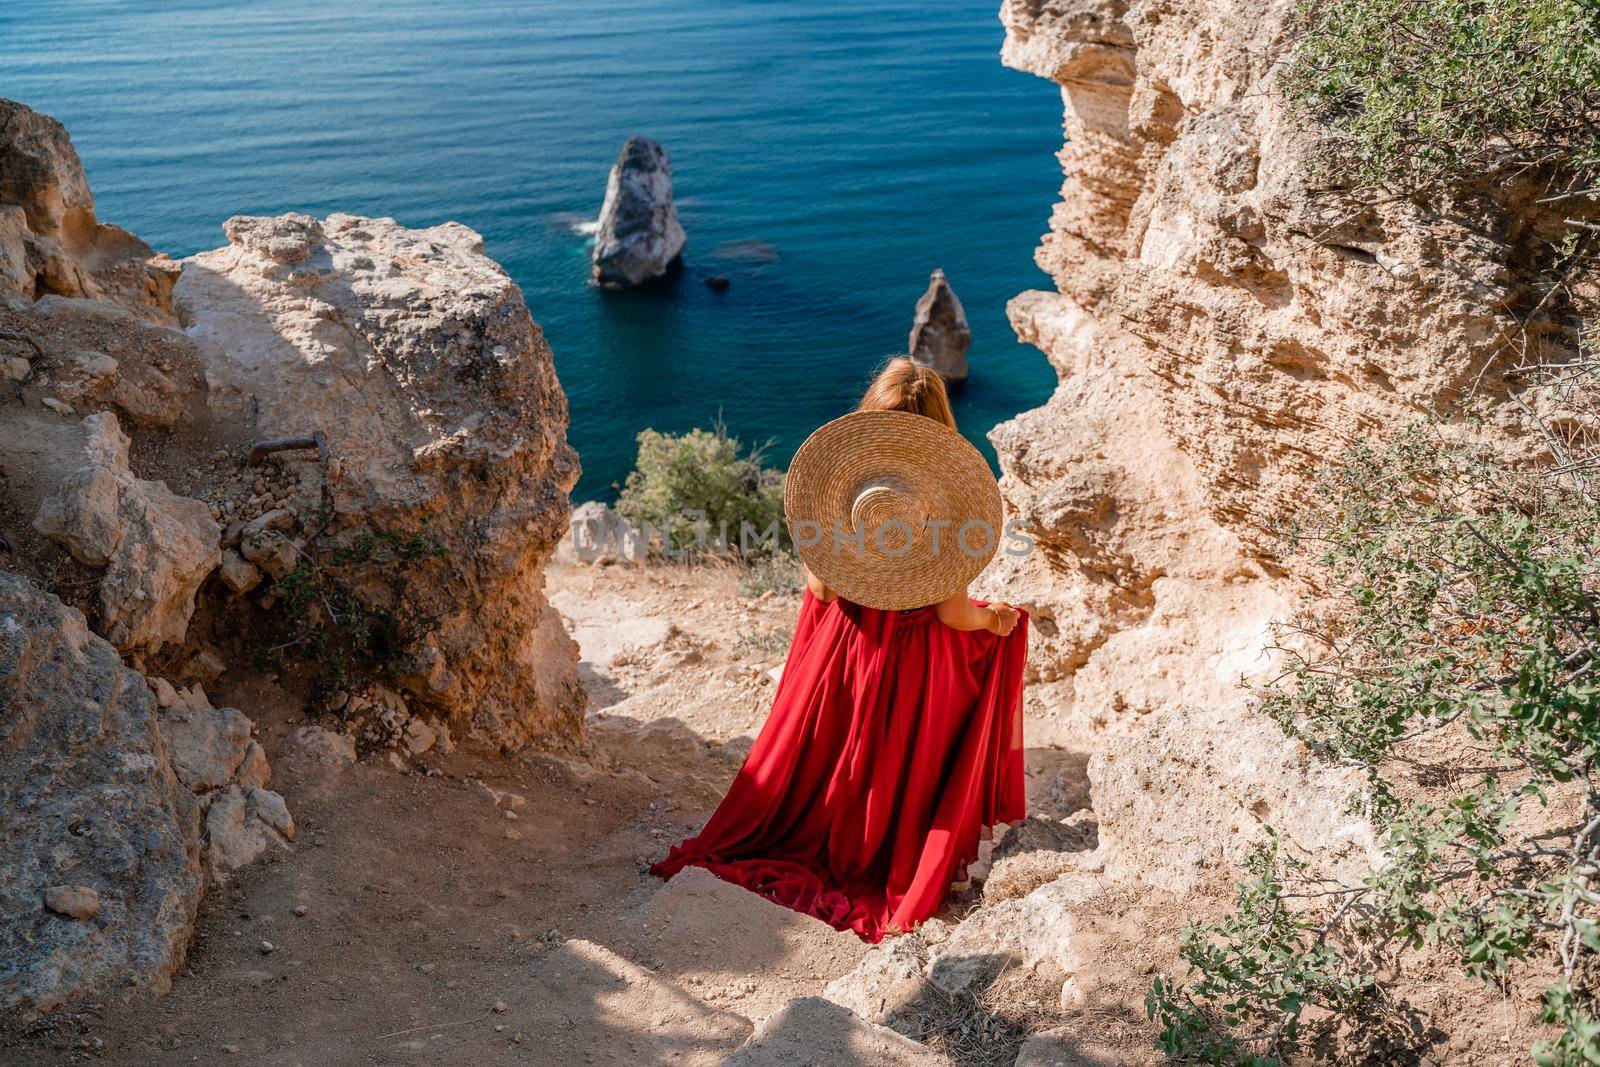 A woman in a flying red dress fluttering in the wind and a straw hat against the backdrop of the sea. by Matiunina